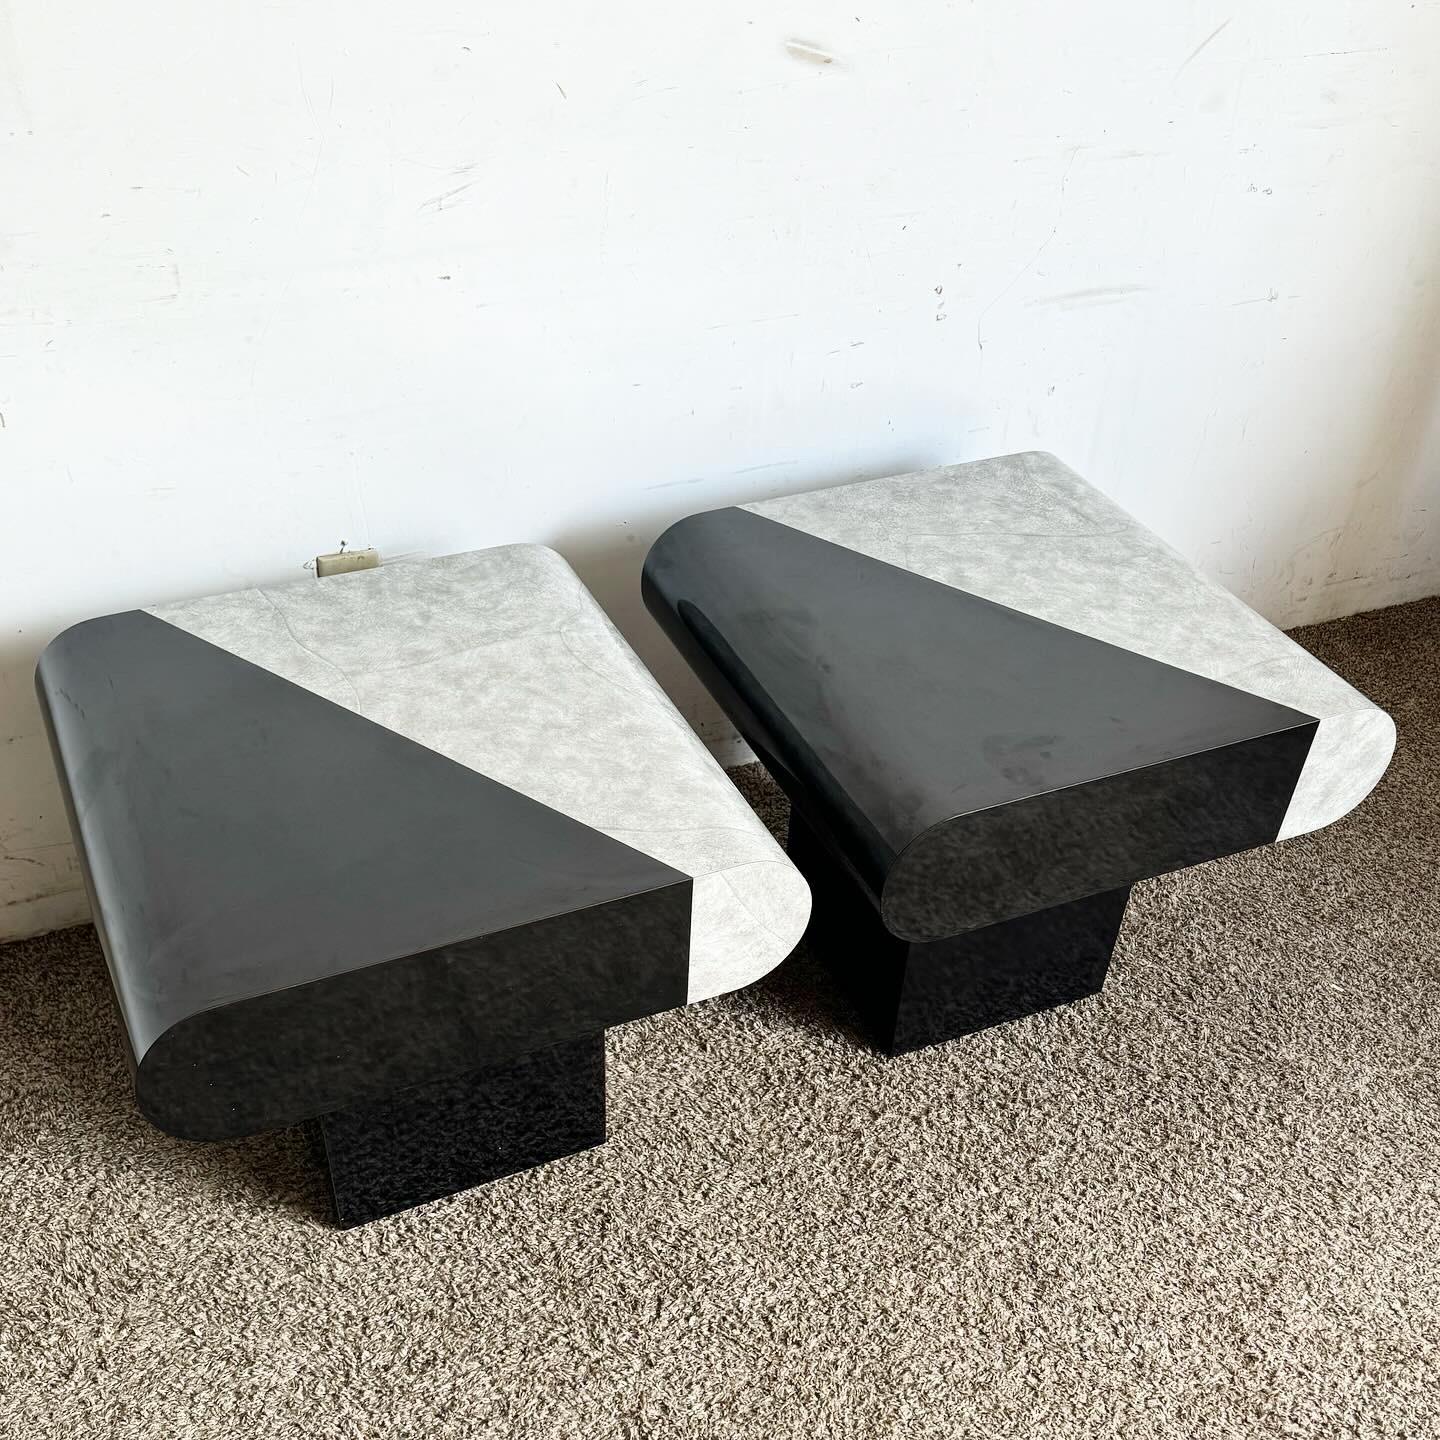 Postmodern Black Gloss and Faux Stone Laminate Bullnose Side Tables - a Pair For Sale 1